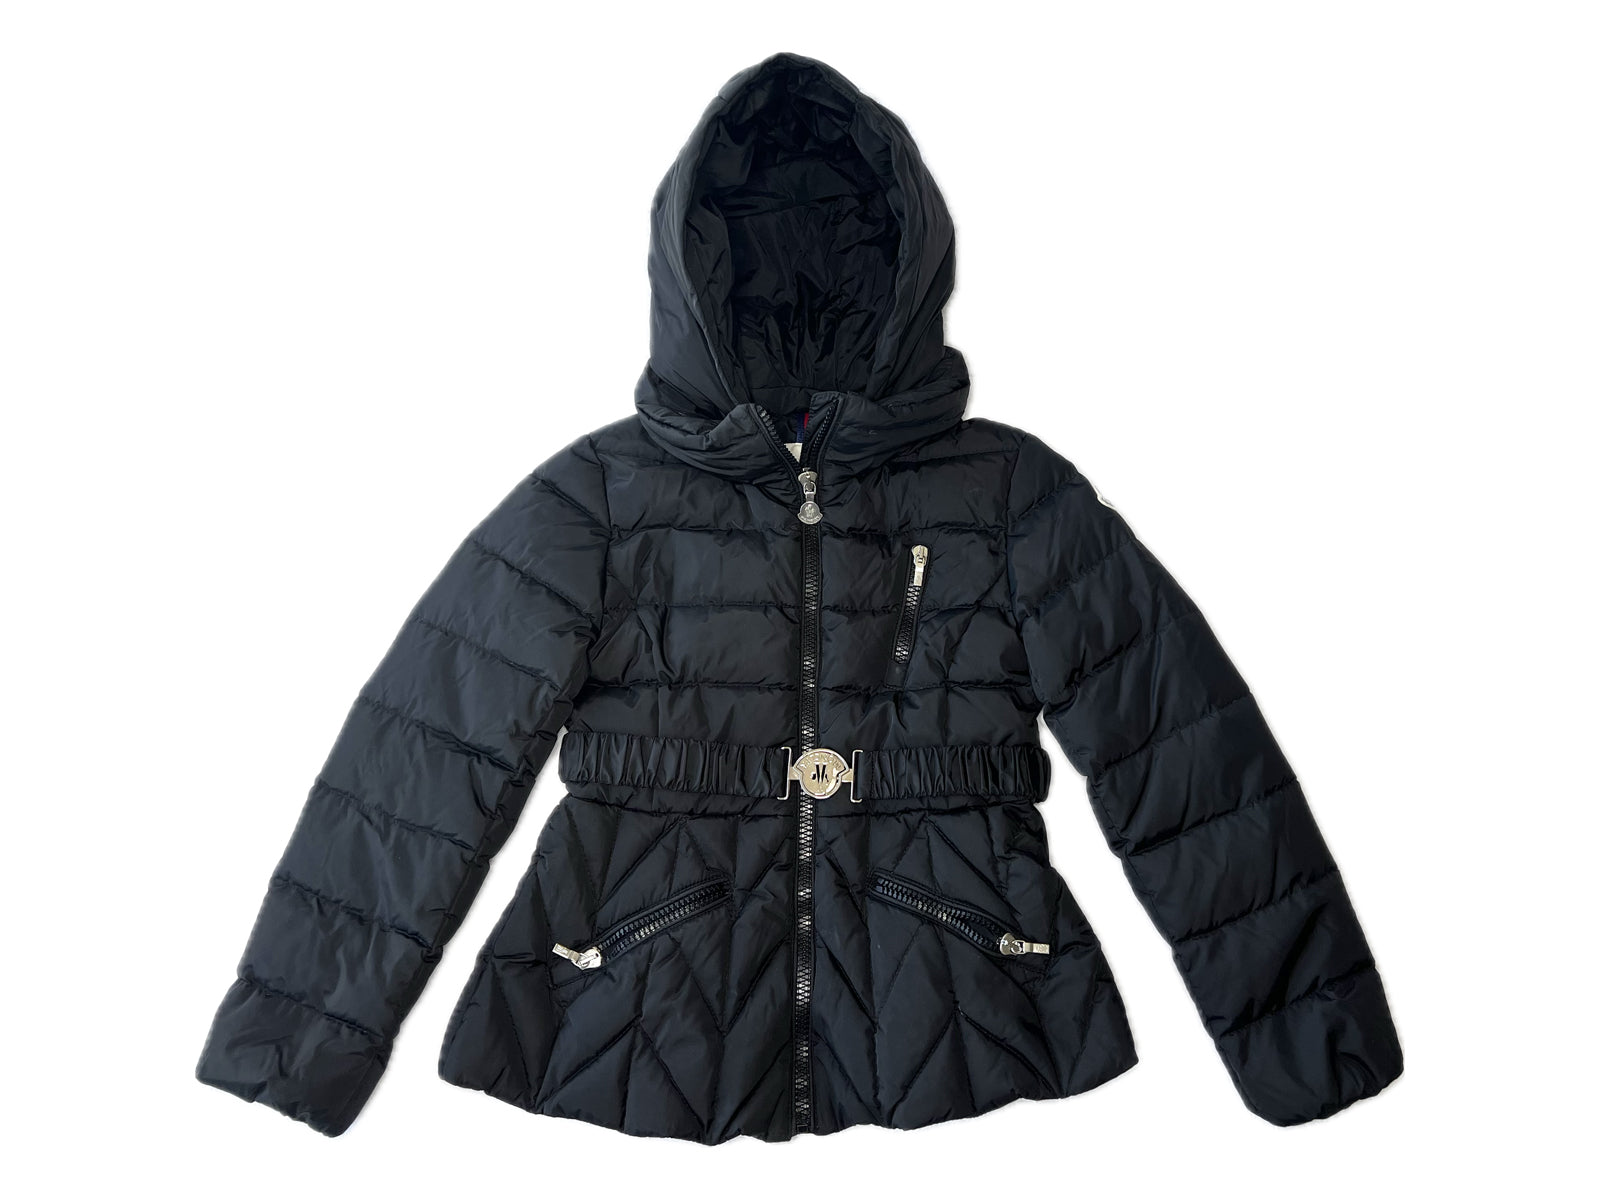 Black Moncler jacket with hood and waist belt and pockets.